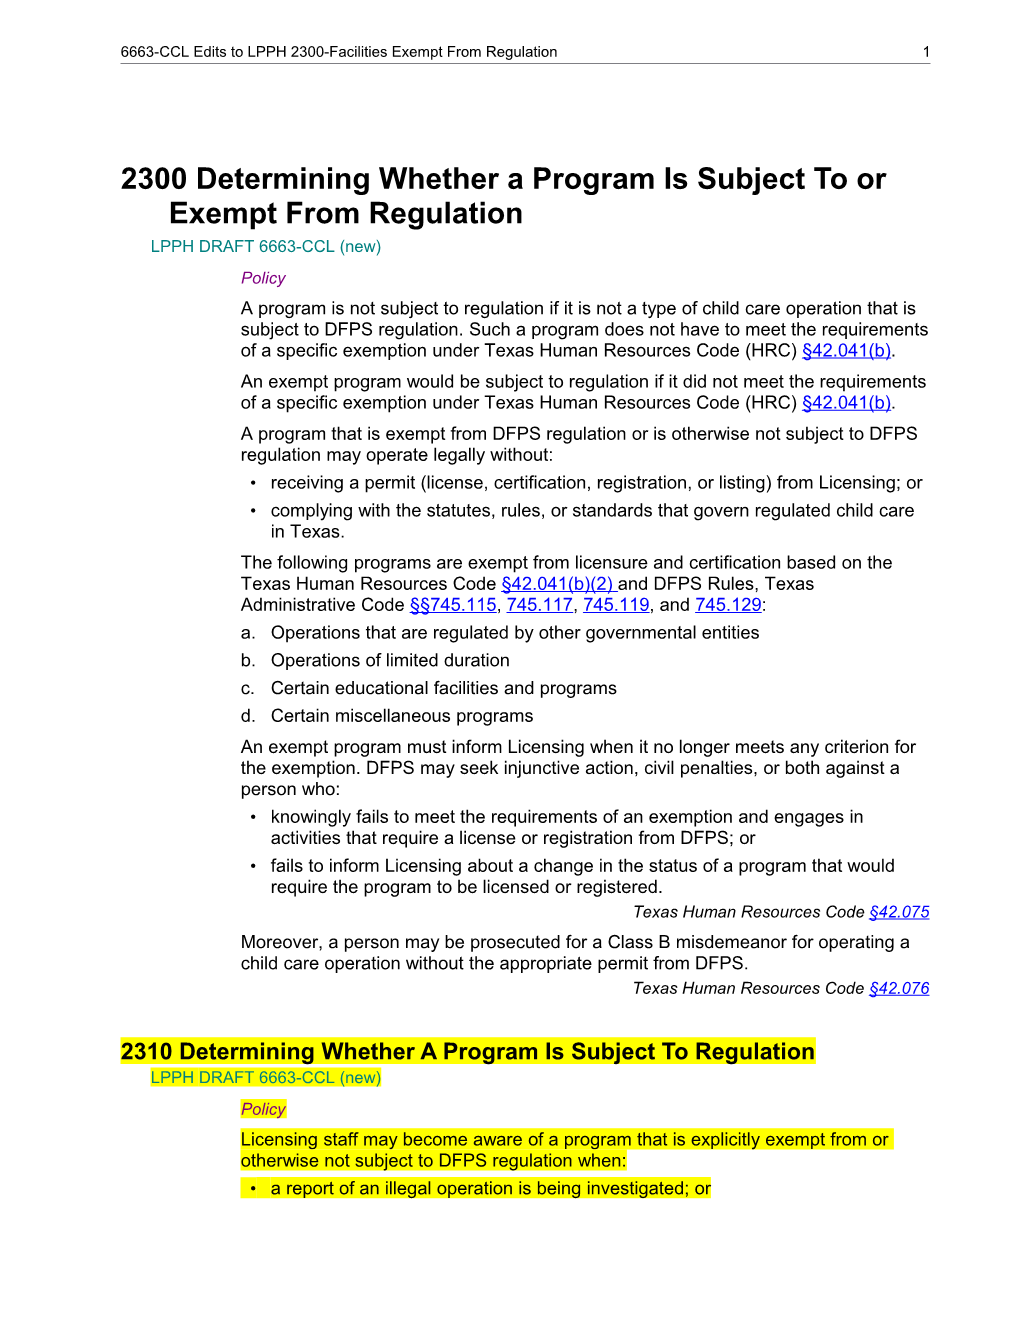 2300 Determining Whether a Program Is Subject to Or Exempt from Regulation